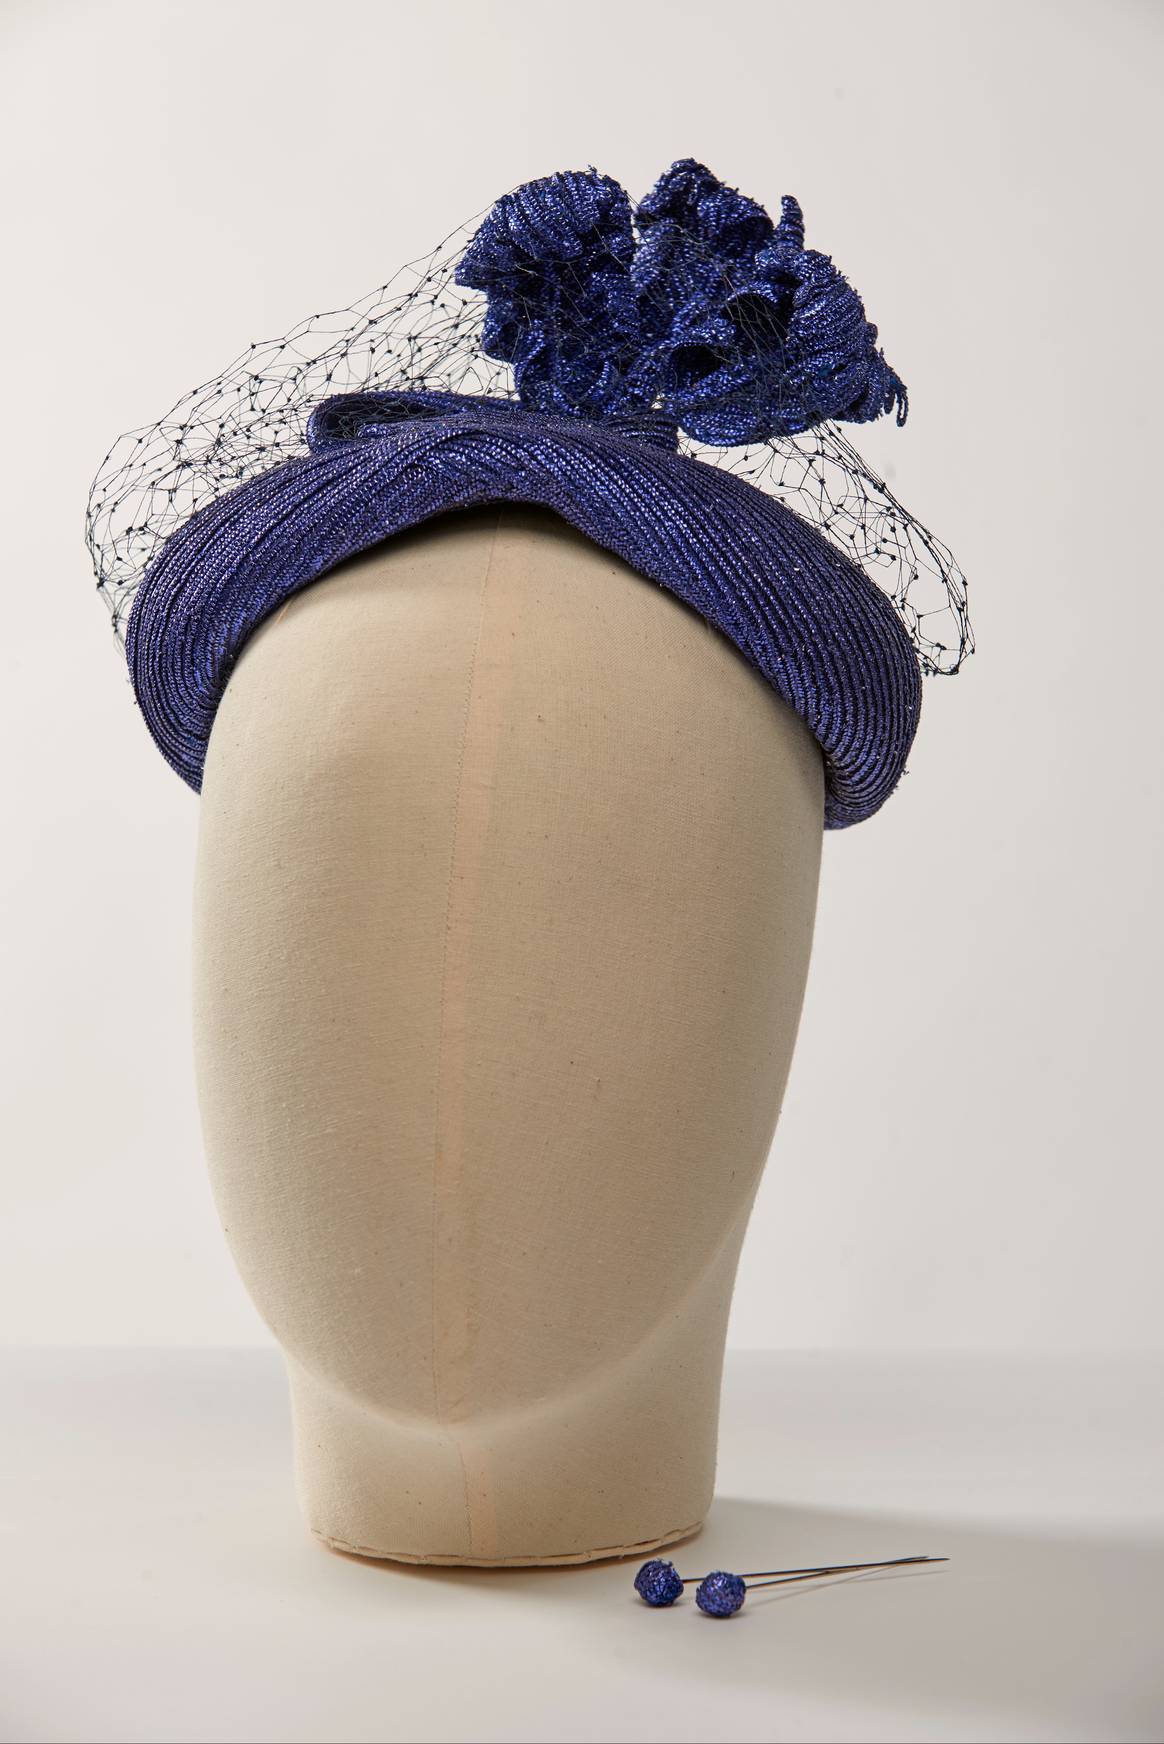 Image: Museum of London; Hat designed by Otto Lucas